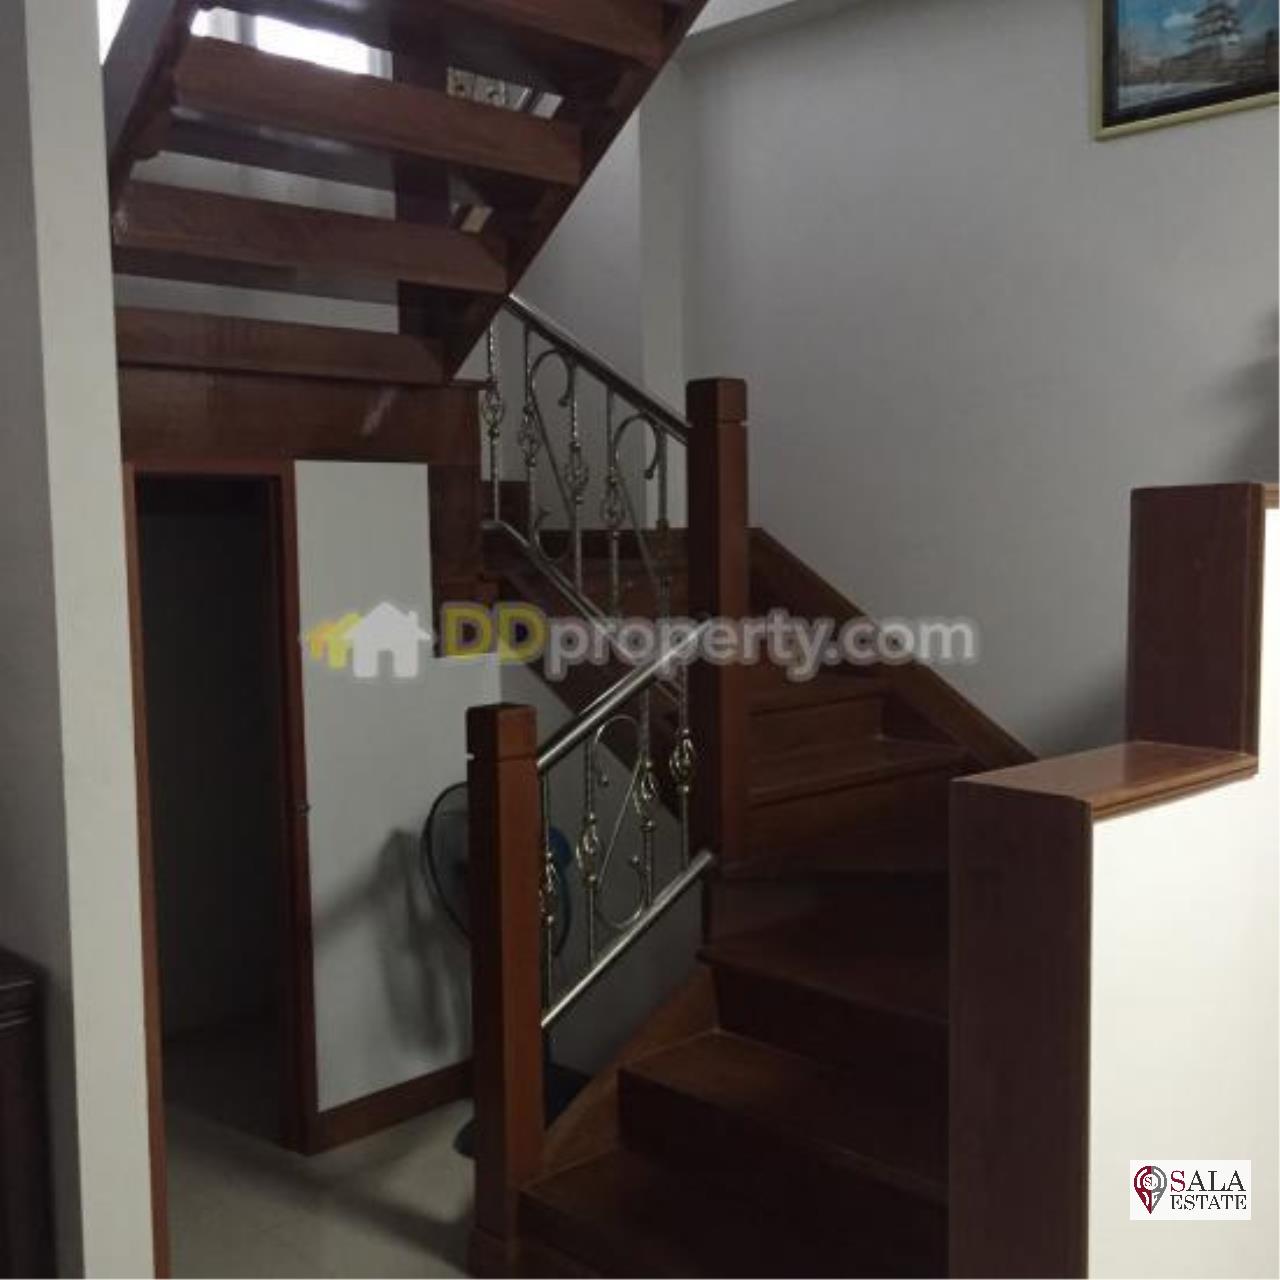 SALA ESTATE Agency's HOUSE FOR SALE - NEAR SUVARNABHUM AIRPORT AND BANG NA -TRAT RD. 9